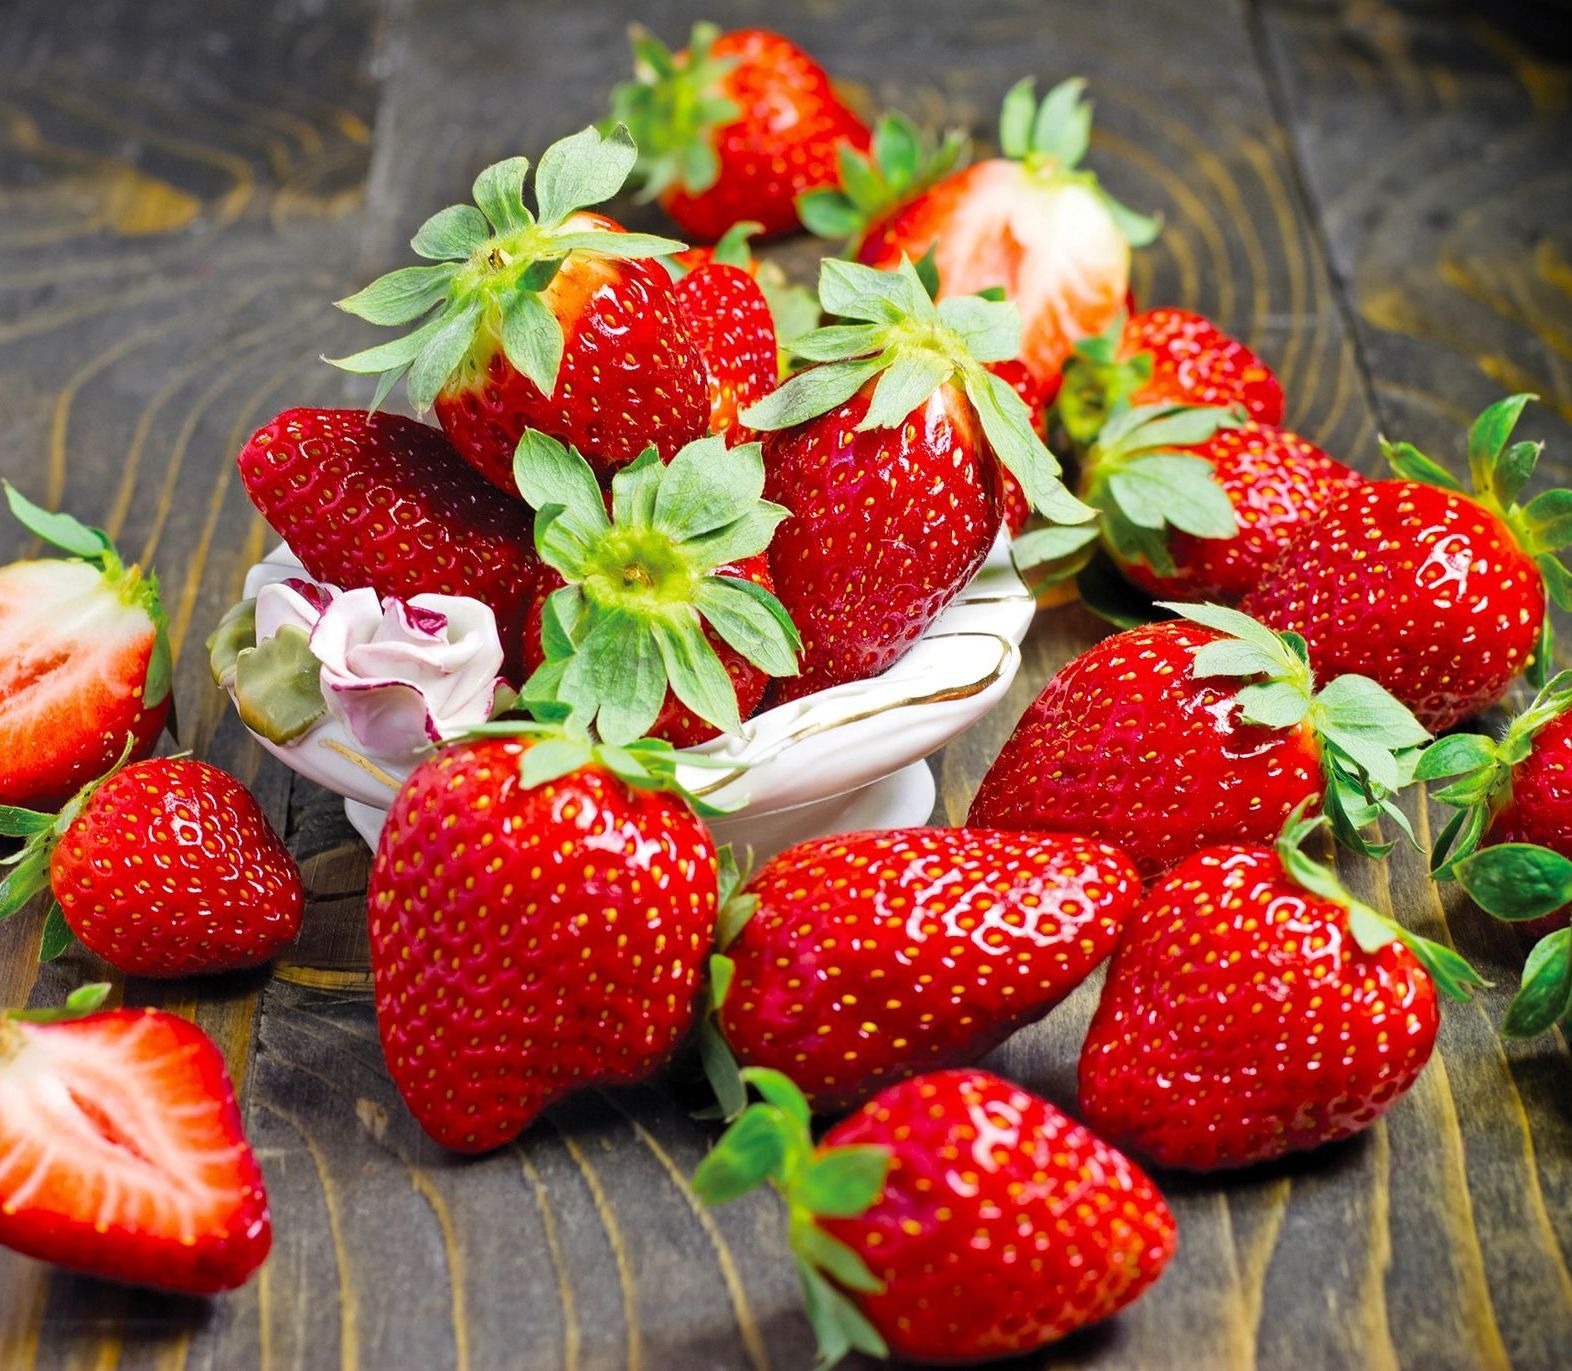 Strawberry, raspberry, & blueberry plants for sale